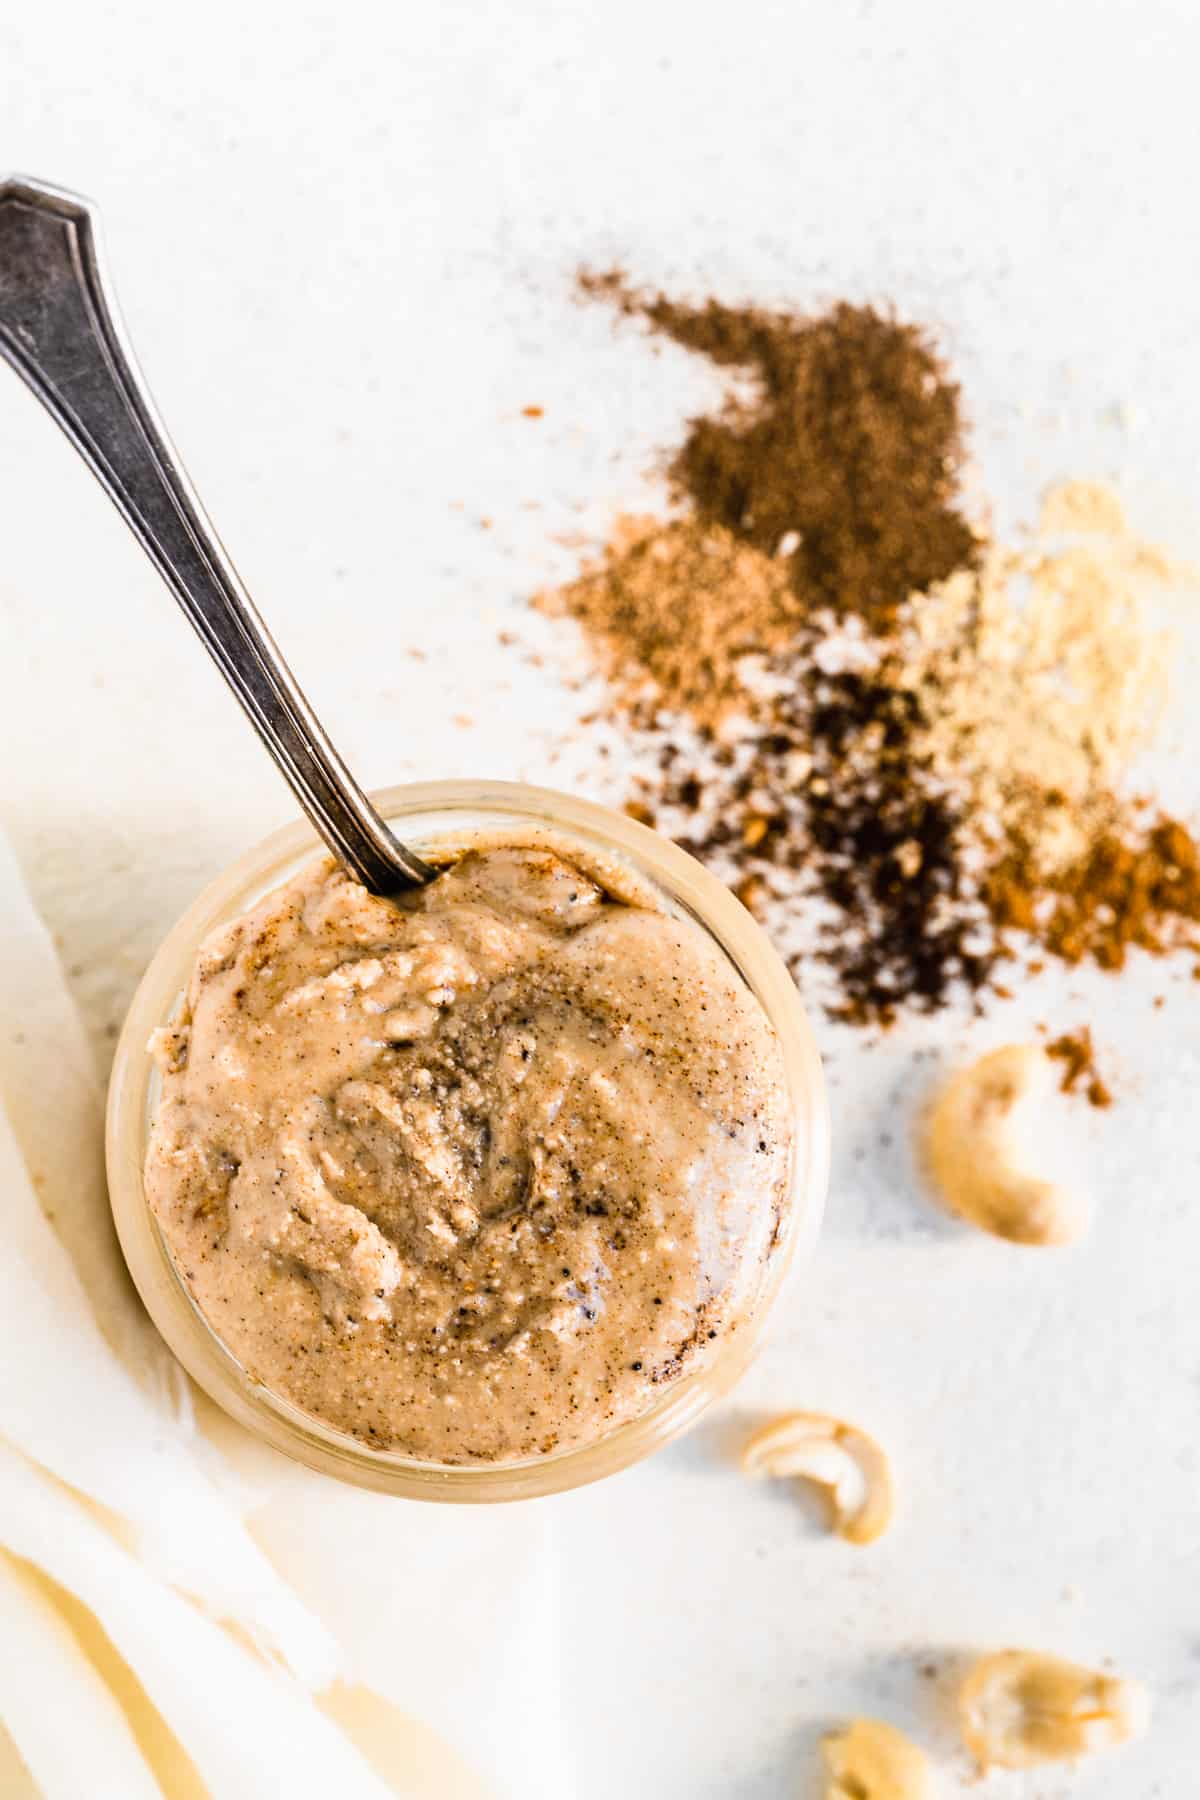 Jar of chia spiced cashew butter with a spoon inside and spices on the surface.